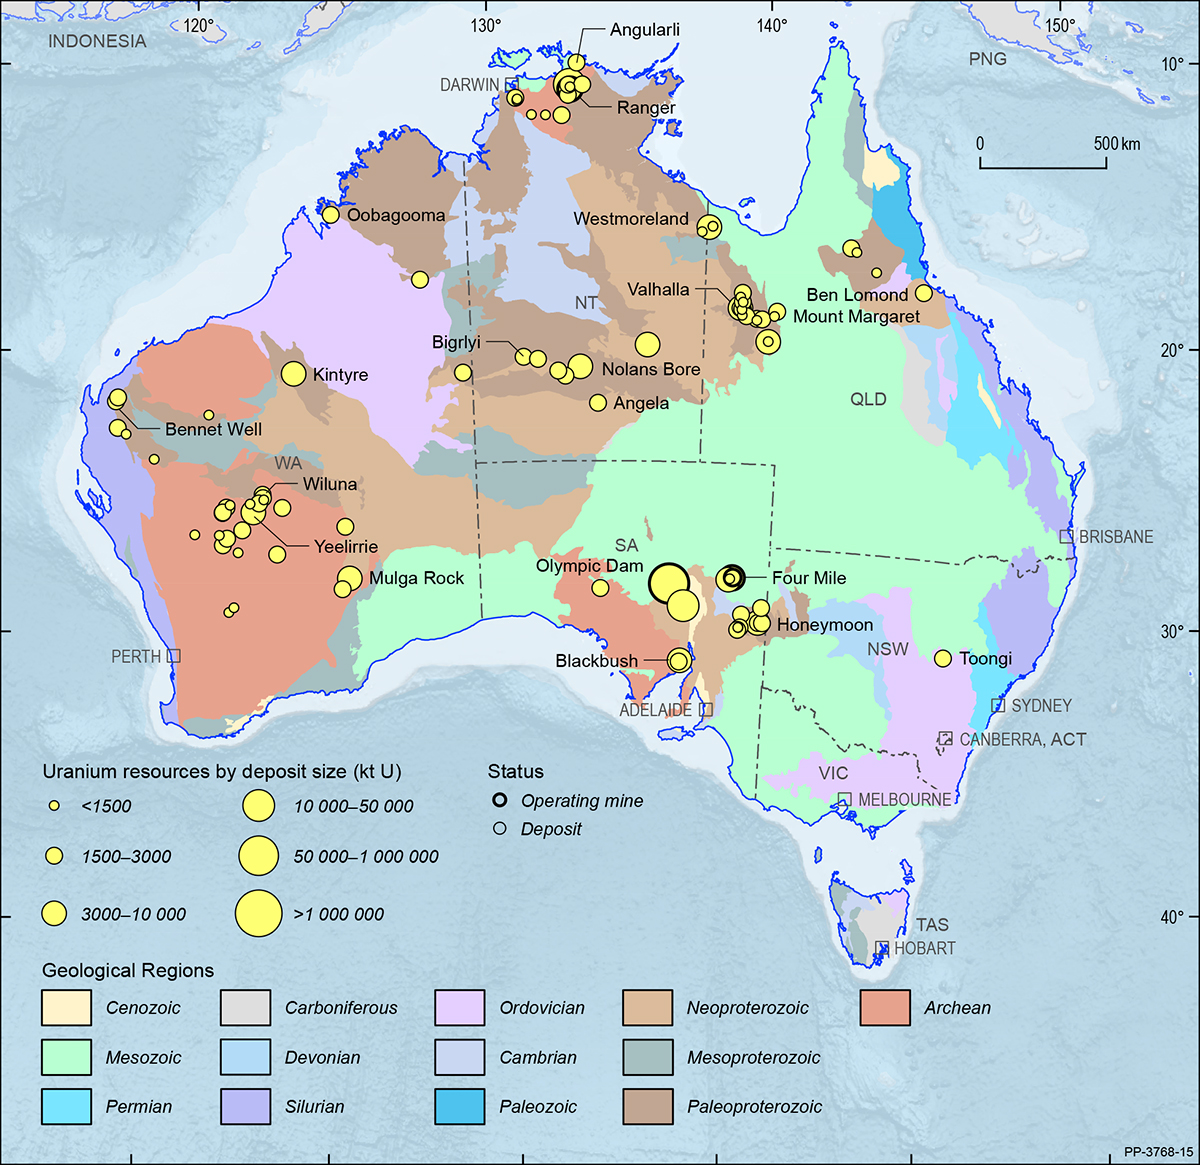 A map showing the Australian continent shaded by the ages of the main geological provinces highlighting the geographical distribution of Australian uranium deposits and operating mines in 2019.